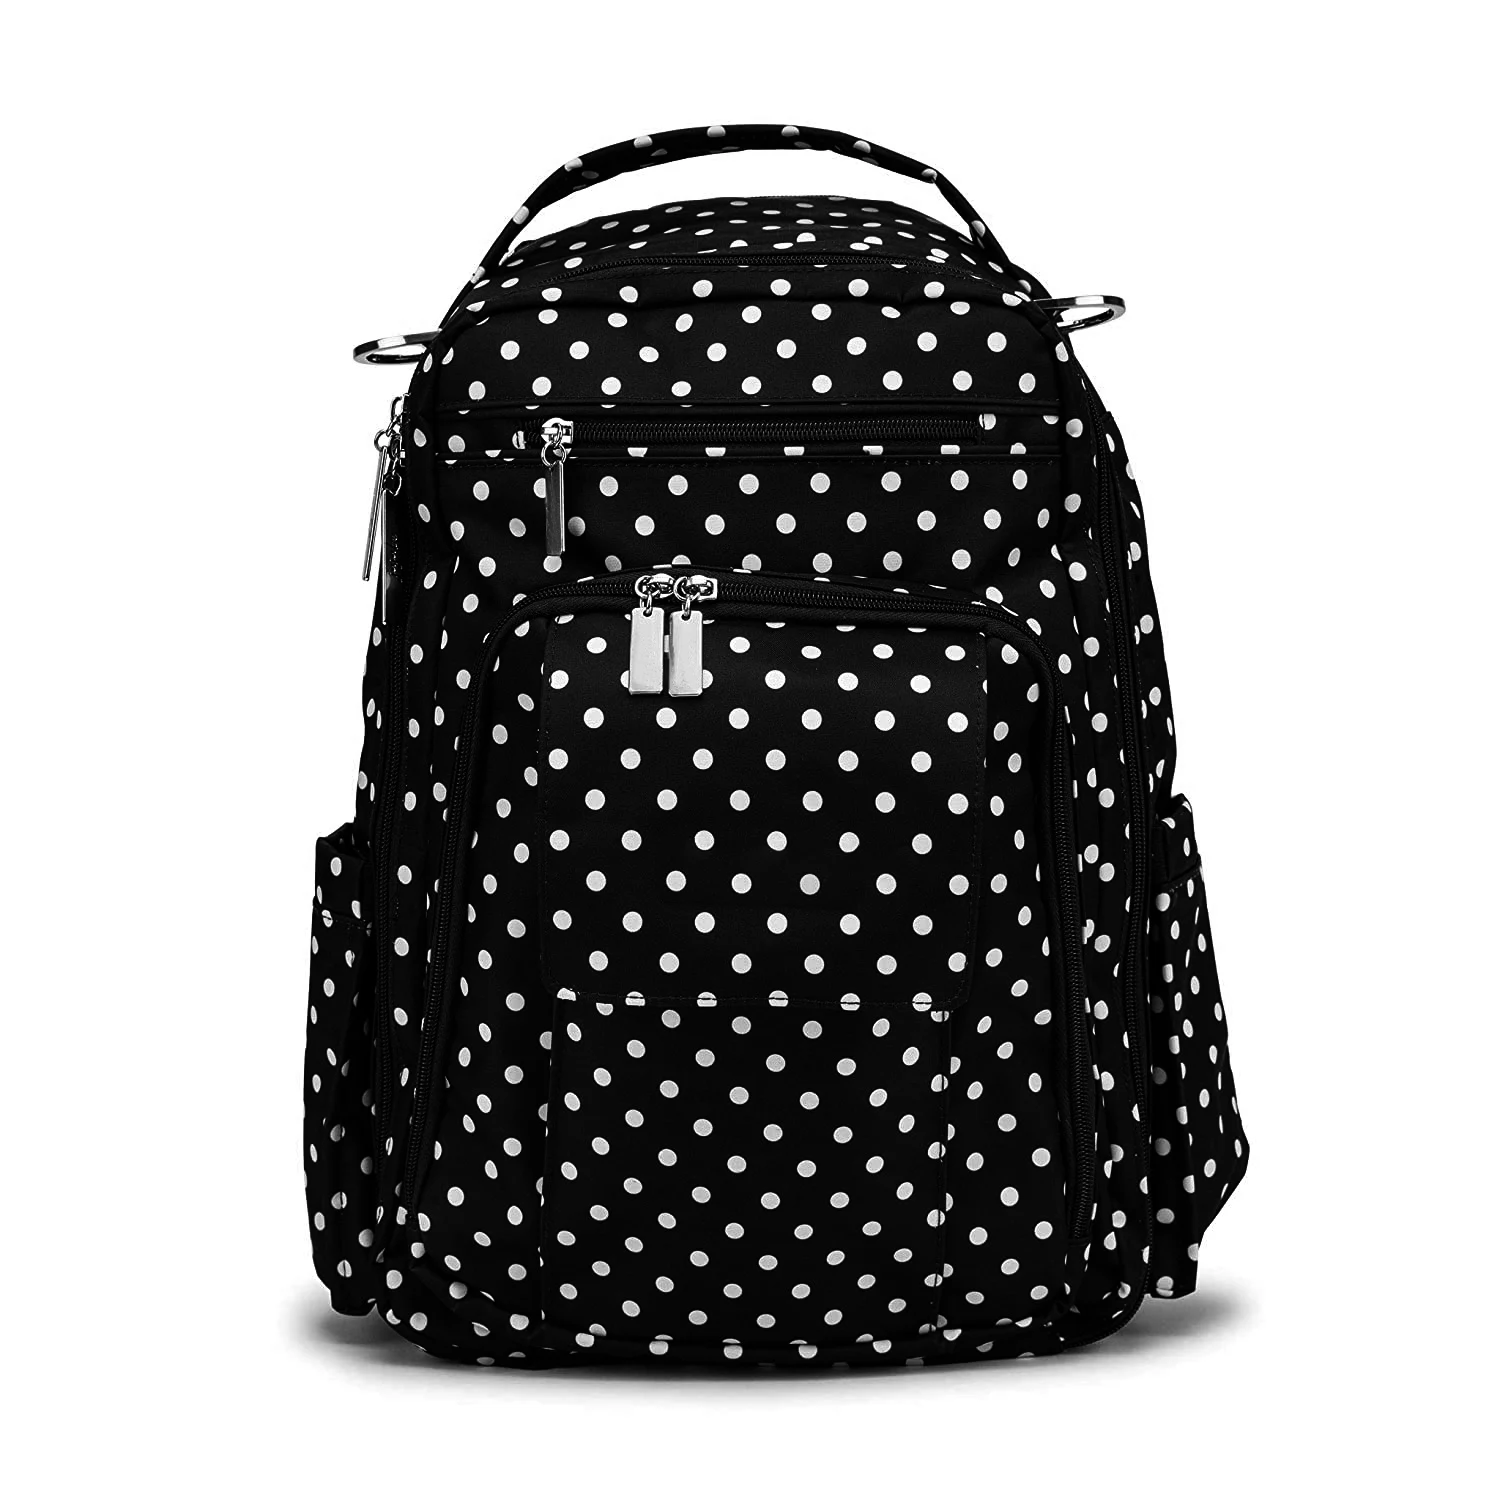 

2021 Wholesale Baby Mummy Mommy Bags Large Waterproof Sterilization Tote Bag Nappy Multifunction Travel Diaper Bag Backpack, Black dot